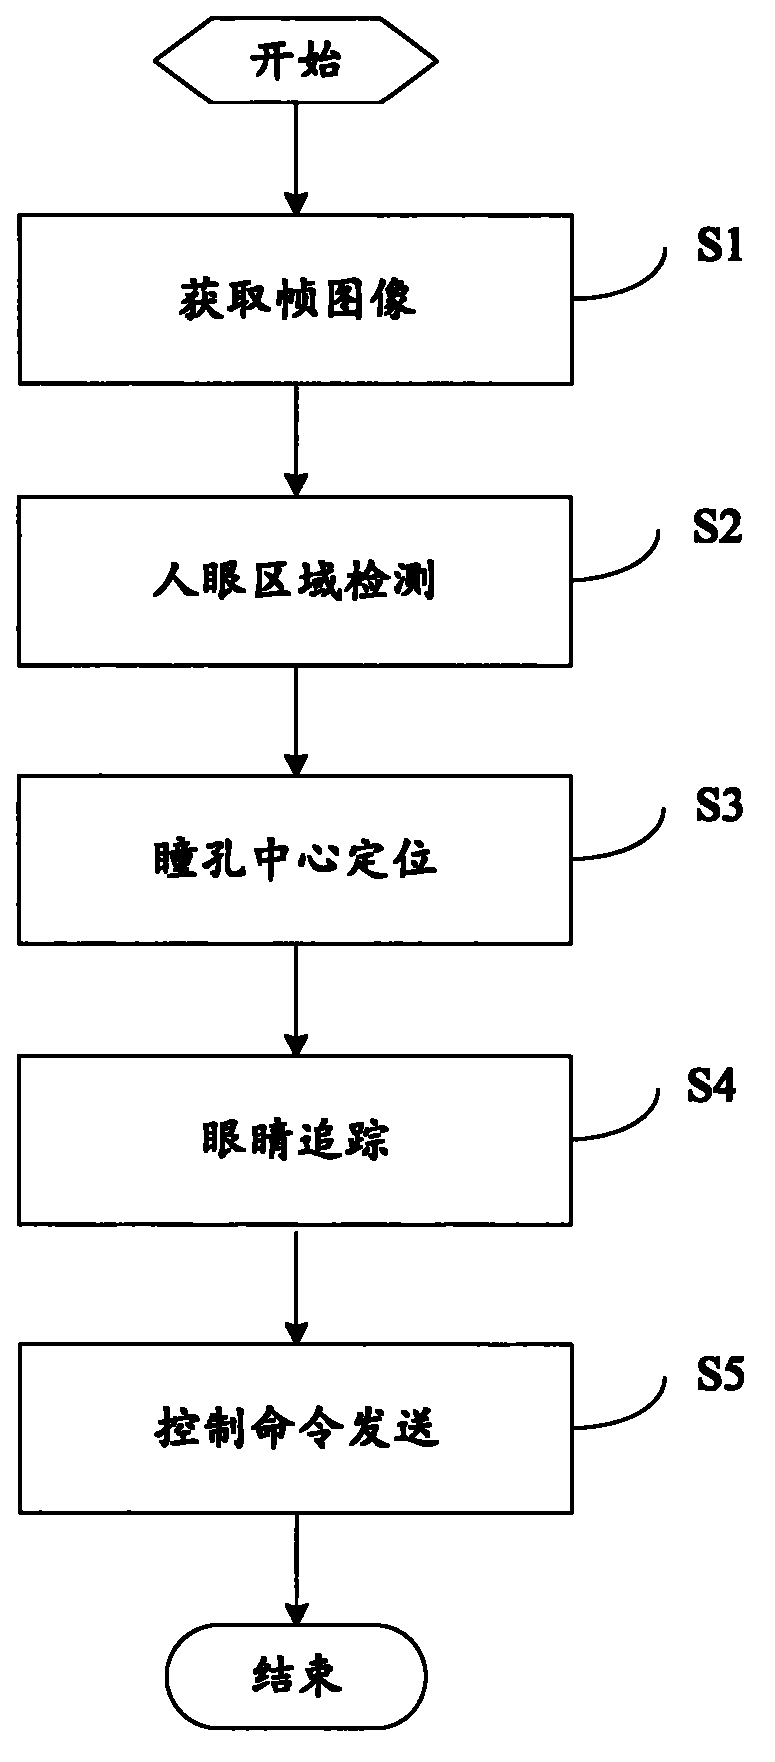 Wink action-based man-machine interaction method and system